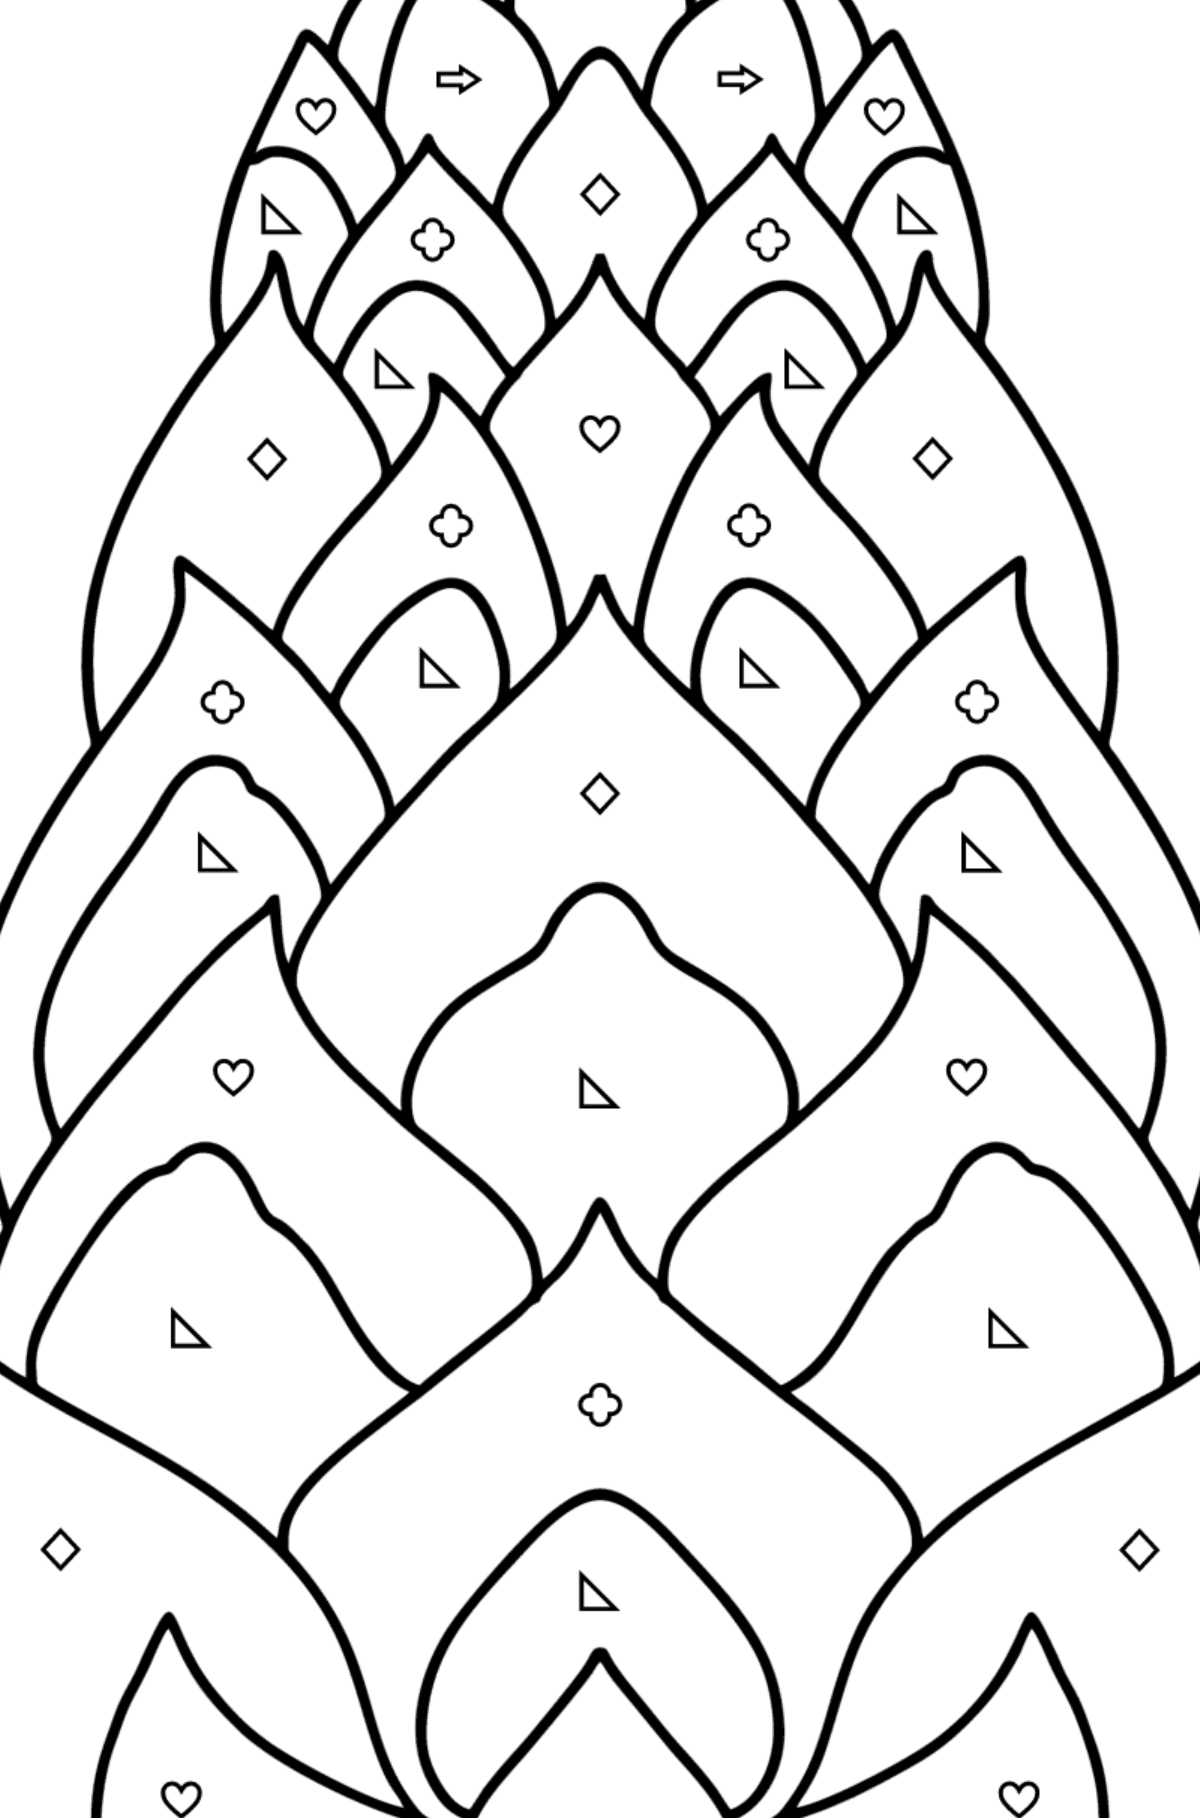 Pinecone from Lambert coloring page - Coloring by Geometric Shapes for Kids